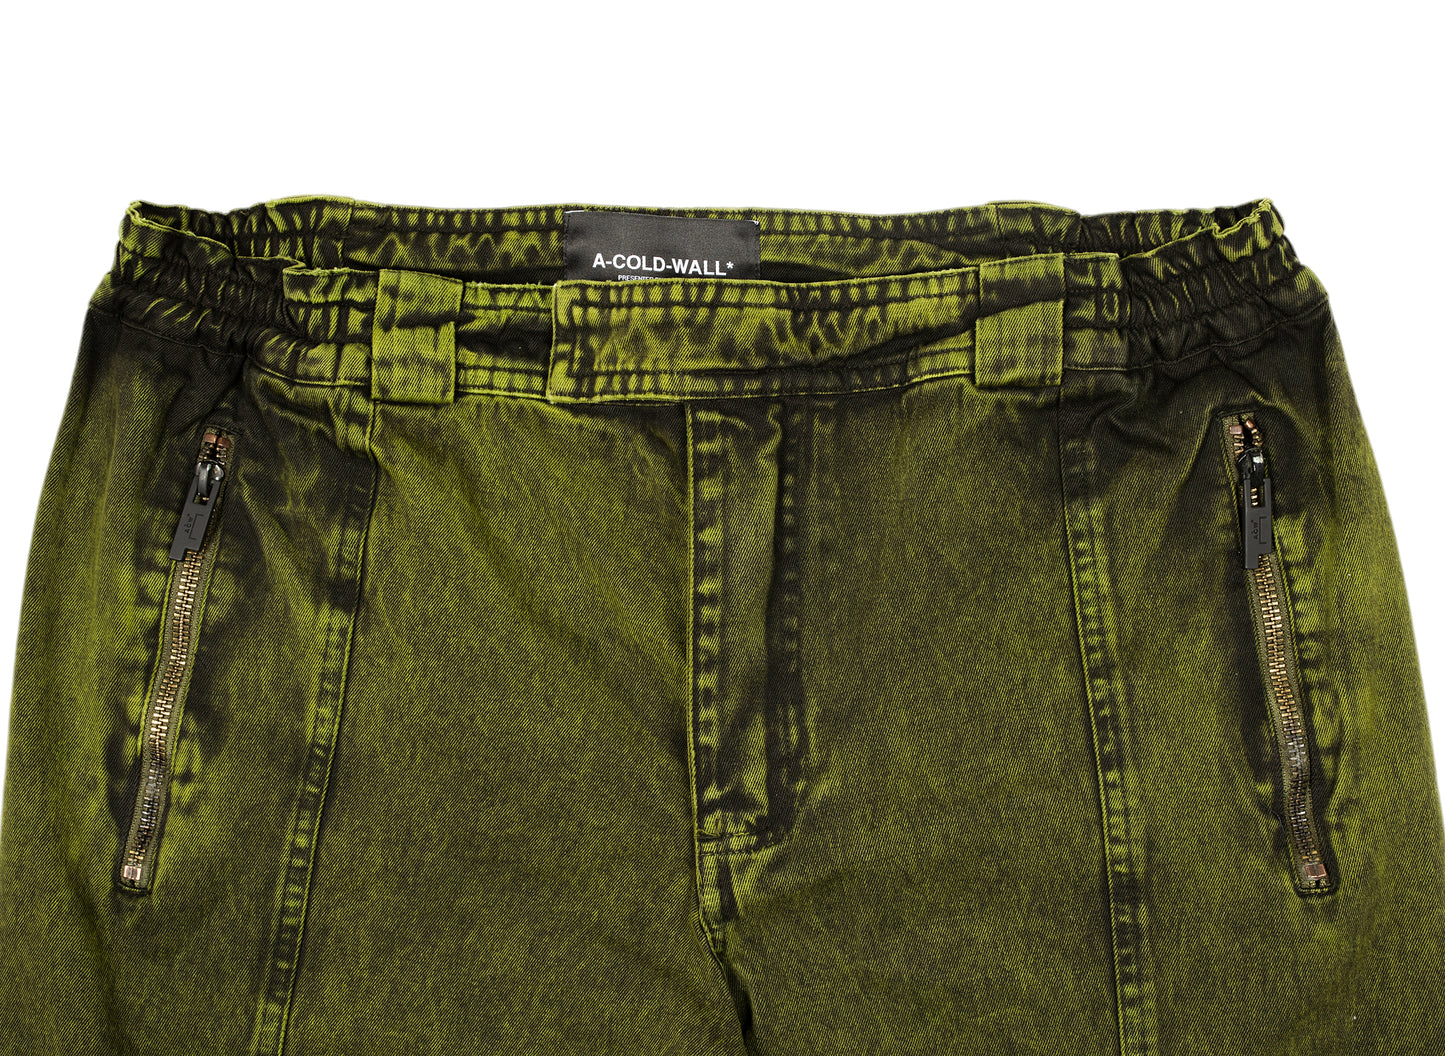 A-COLD-WALL* Memory Cargo Pants in Military Green